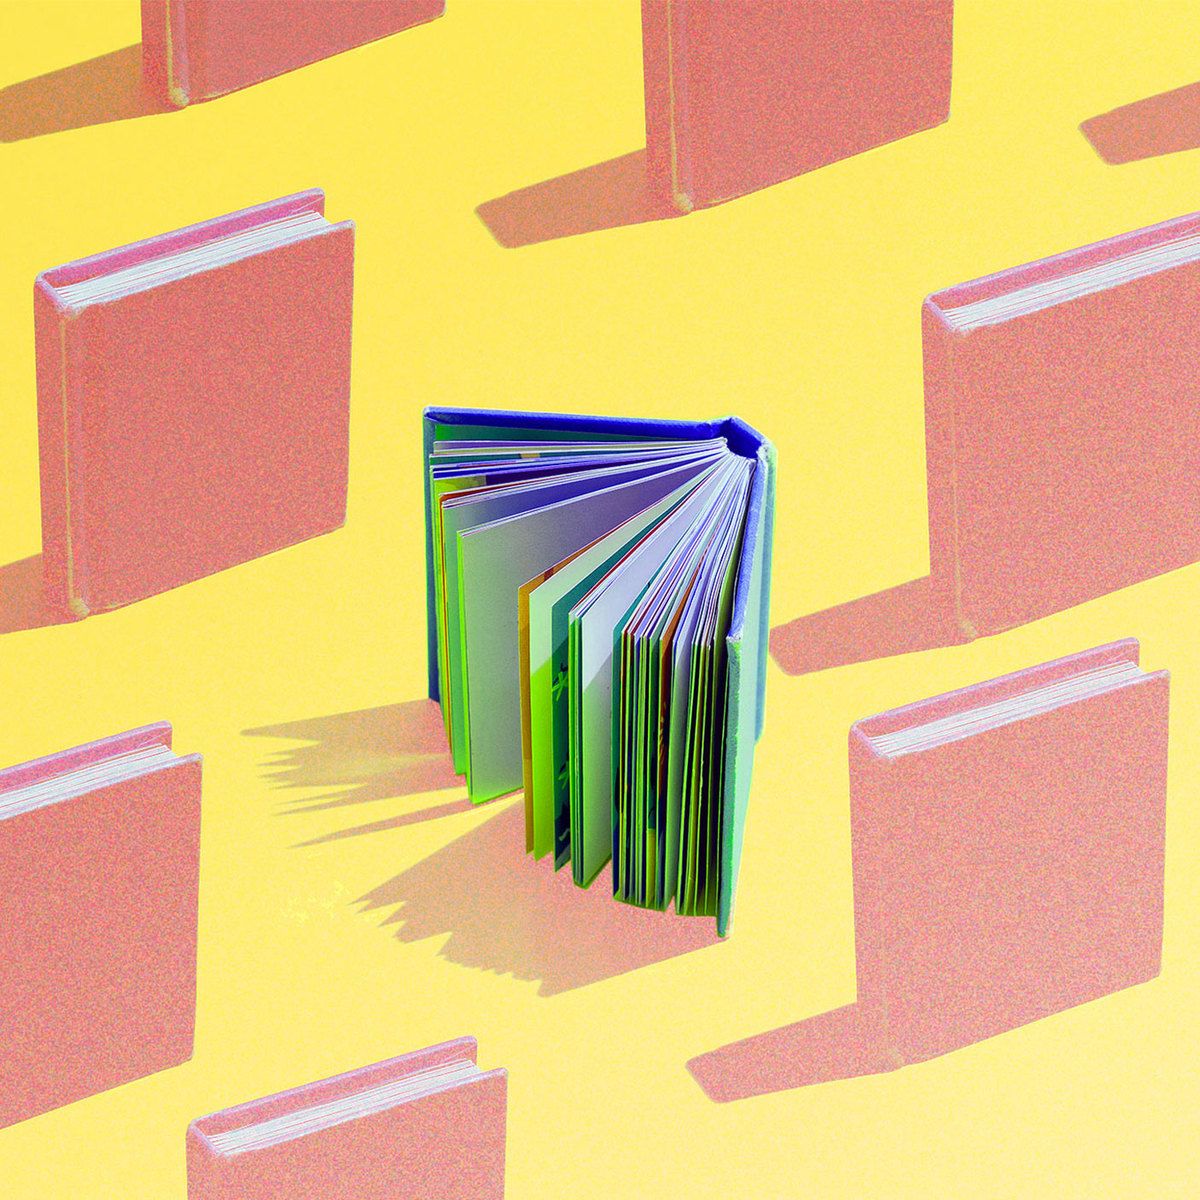 coral books blue and green book on yellow background